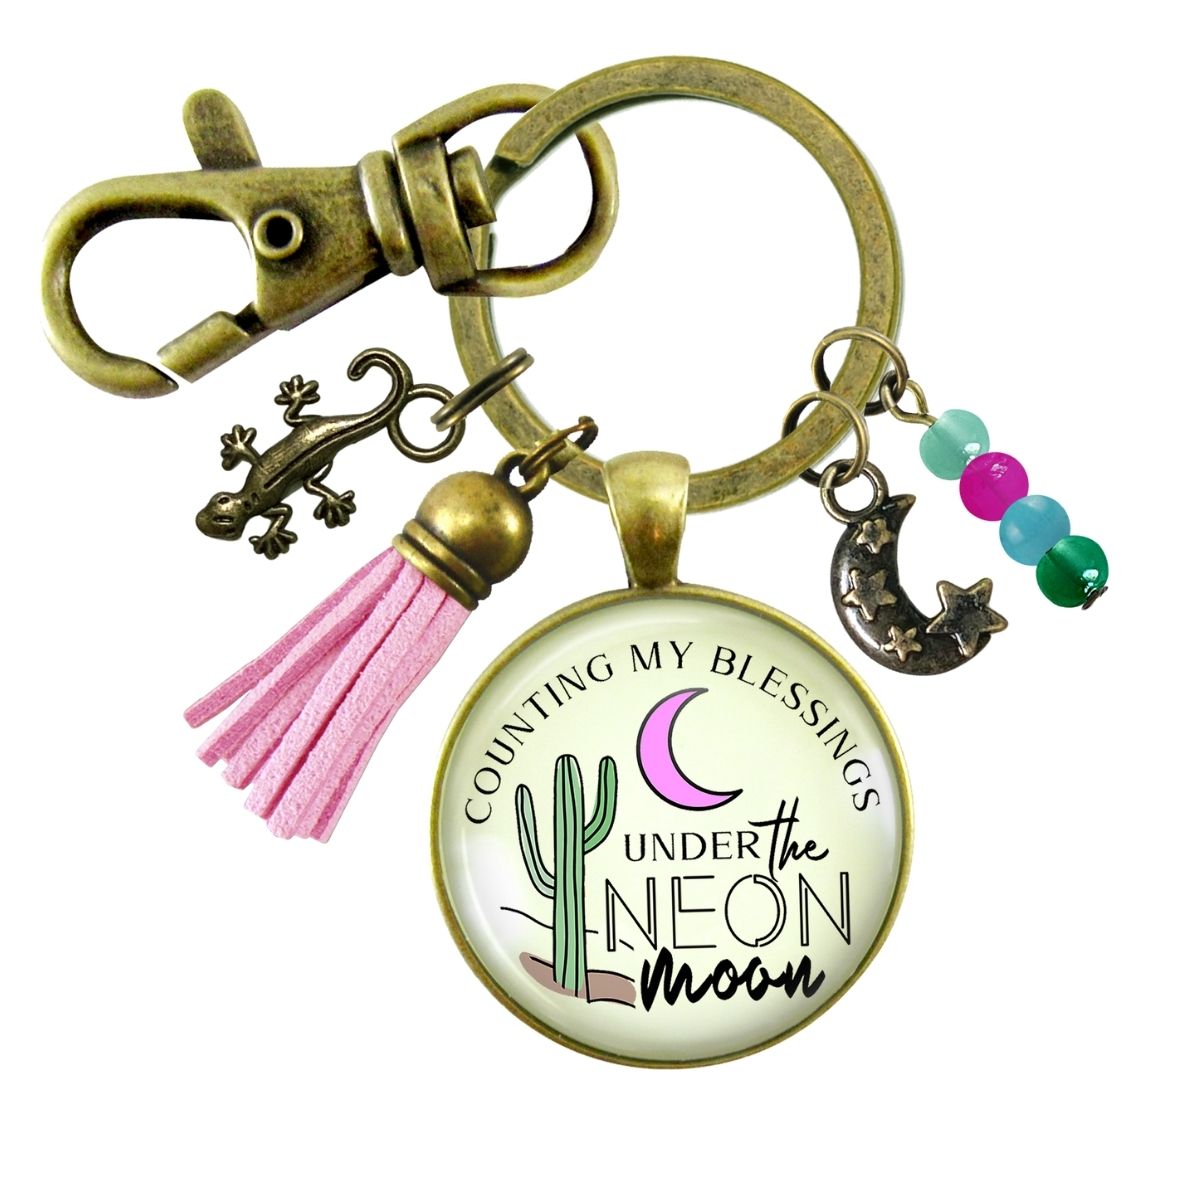 Handmade Gutsy Goodness Jewelry Counting My Blessings Under The Neon Moon Keychain Southwest Boho Jewelry Tassel & Gecko Charms